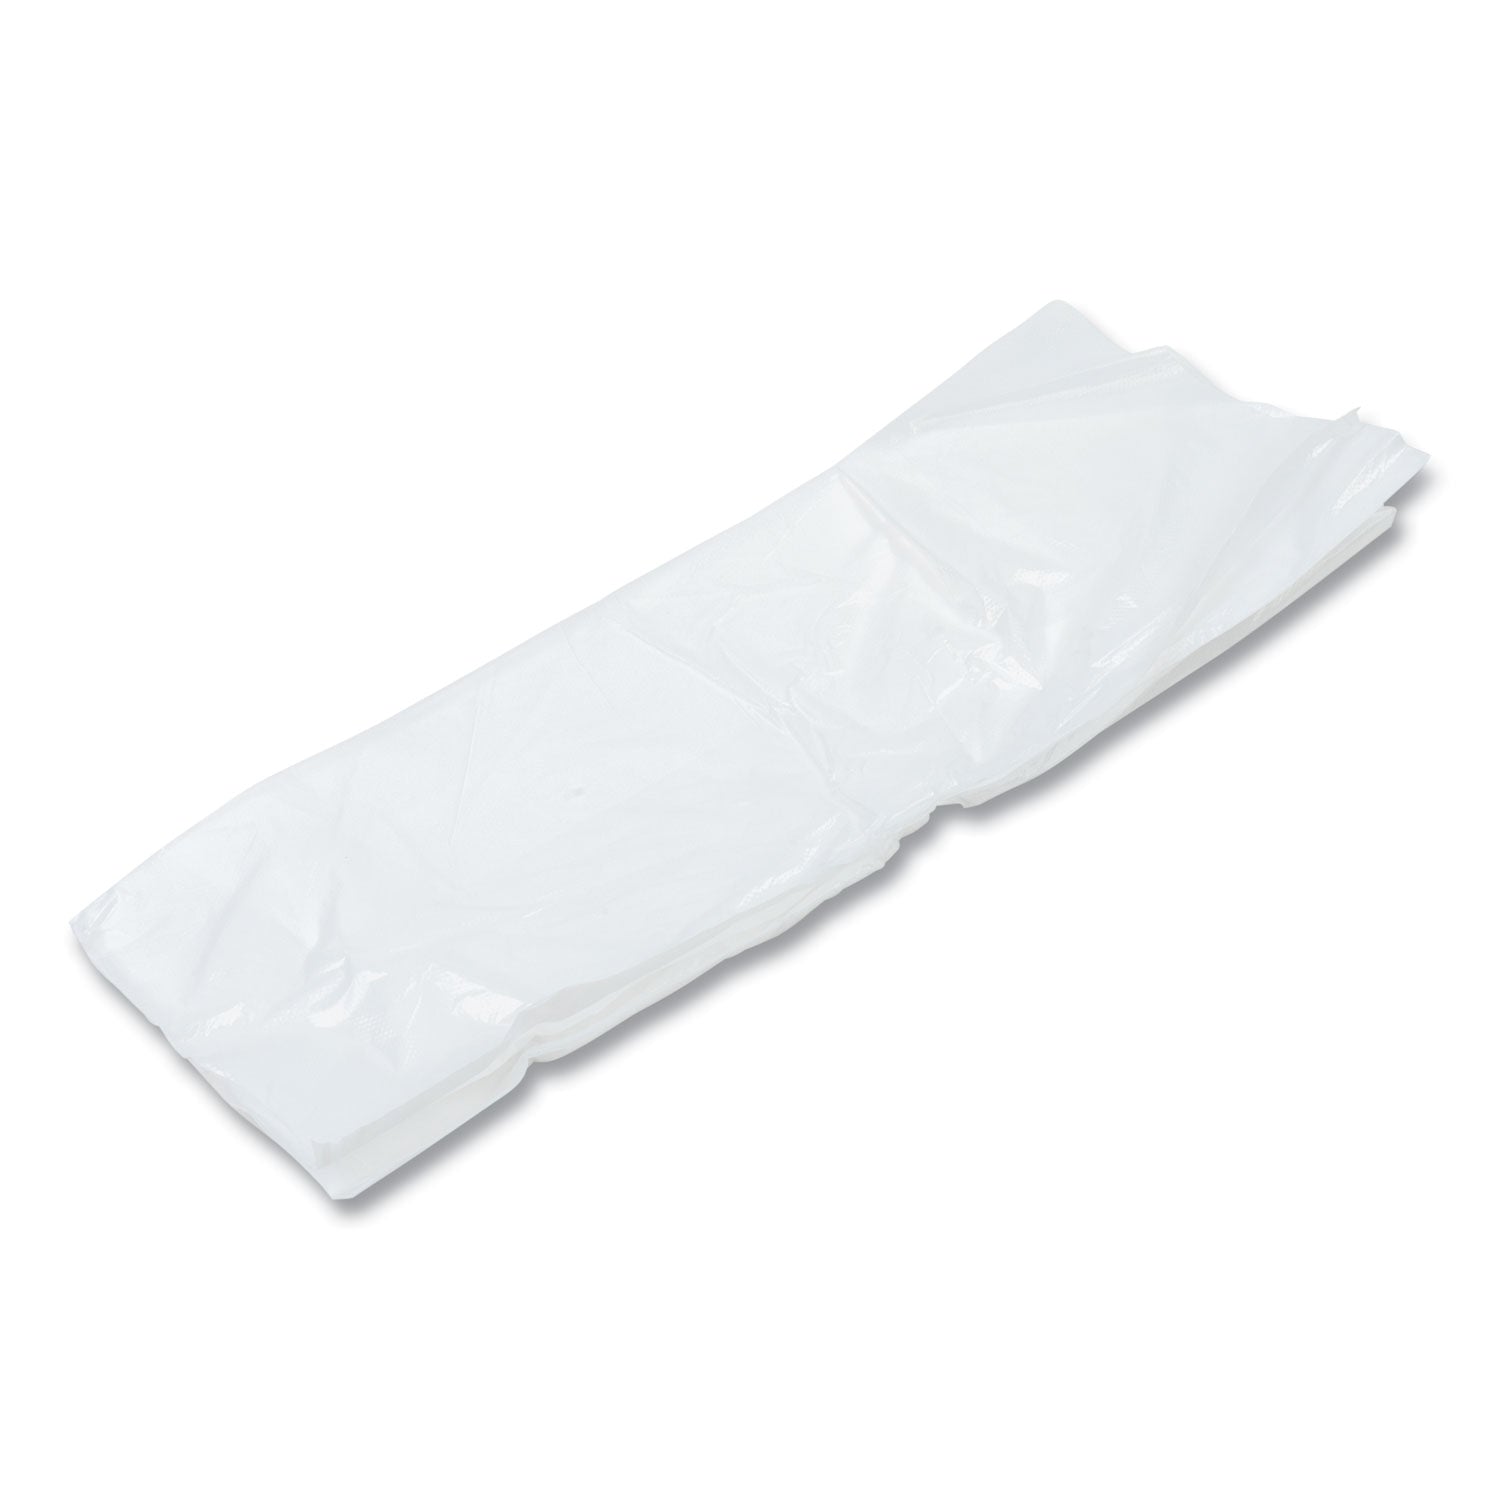 poly-apron-28-x-46-one-size-fits-all-white-100-pack-10-packs-carton_rppda2846 - 6